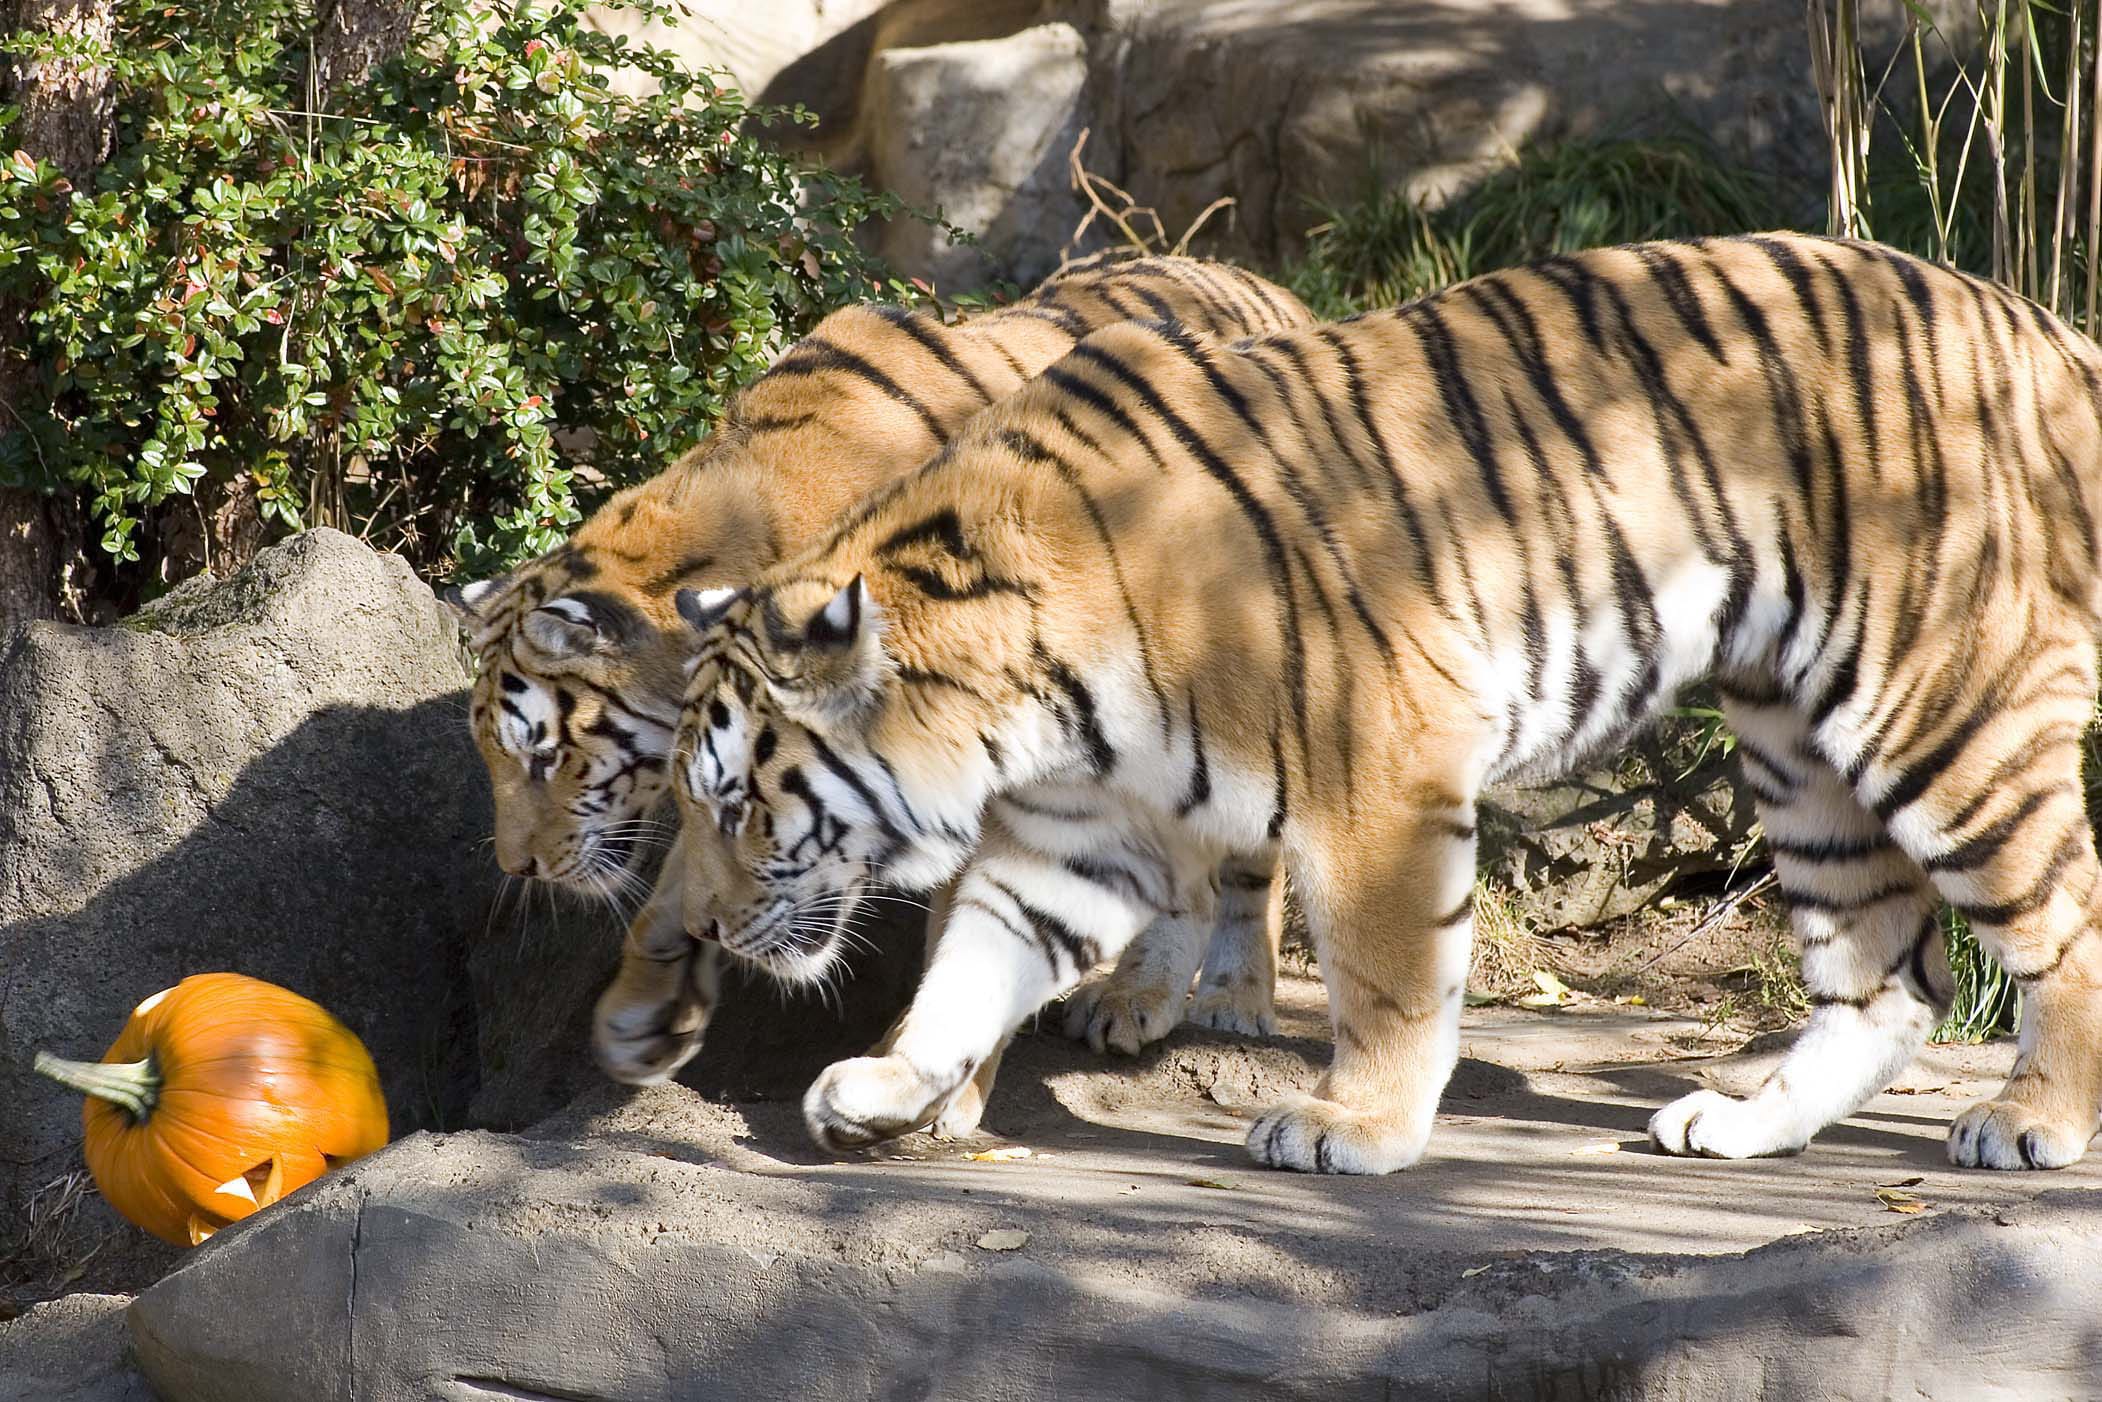 The Oregon Zoo's Amur tigers, Nicole, back, and Mikhail, celebrate their birthdays with Halloween-themed treats in October 2009.